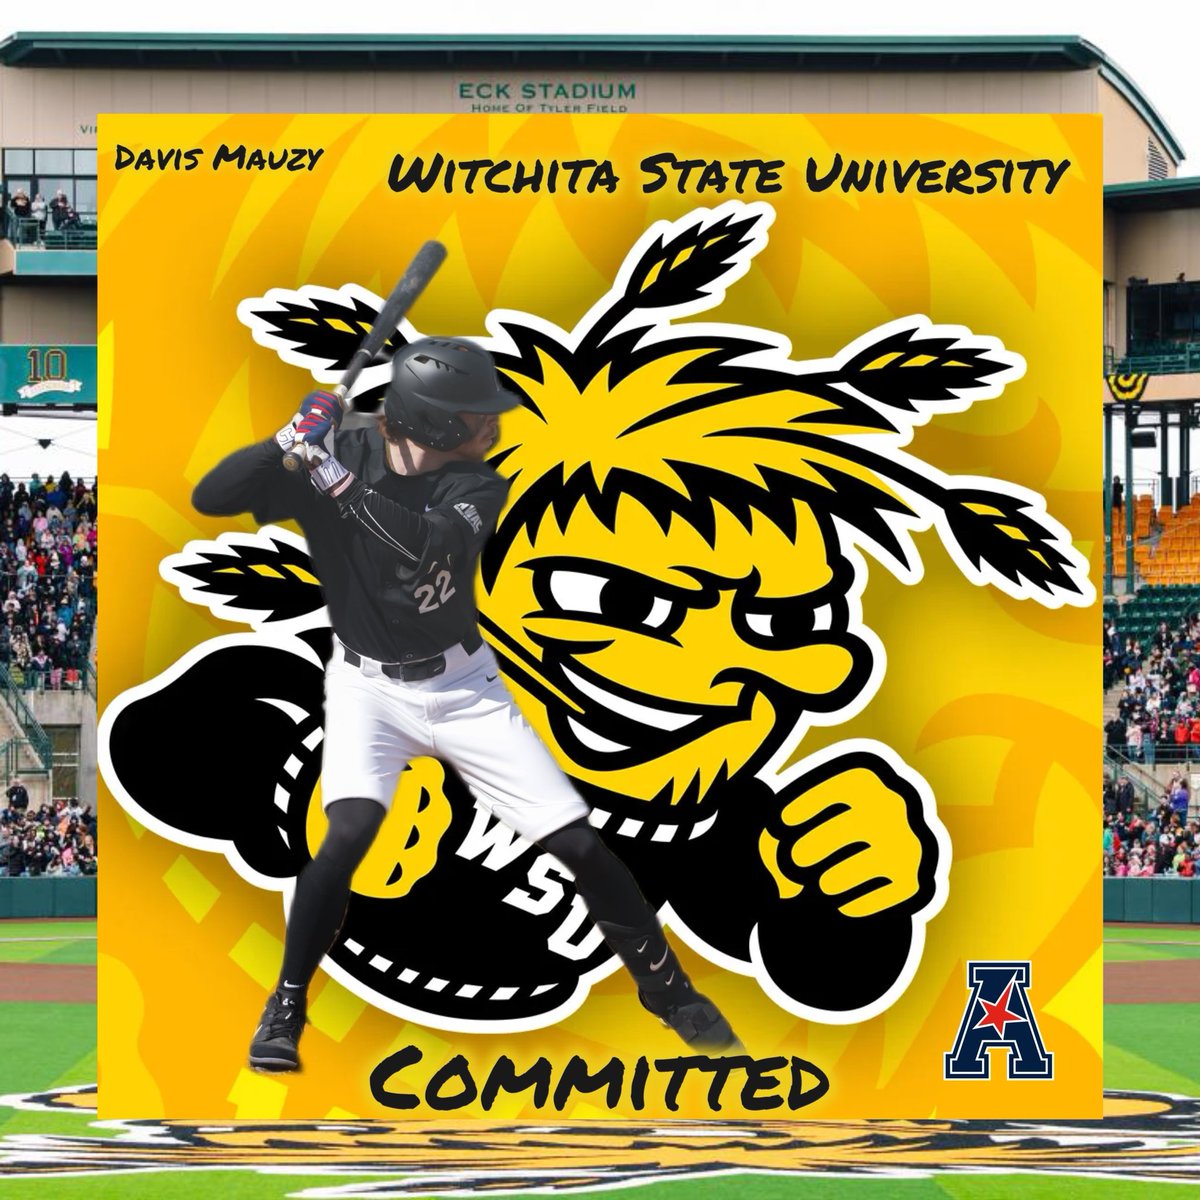 Well I knew this day was coming!! We’ve been working together for over a year now and today is the day that @DavisMauzy and I spoke about. He took the #JucoRouts and now is headed to play for @GoShockersBSB !! Congratulations nephew!!!